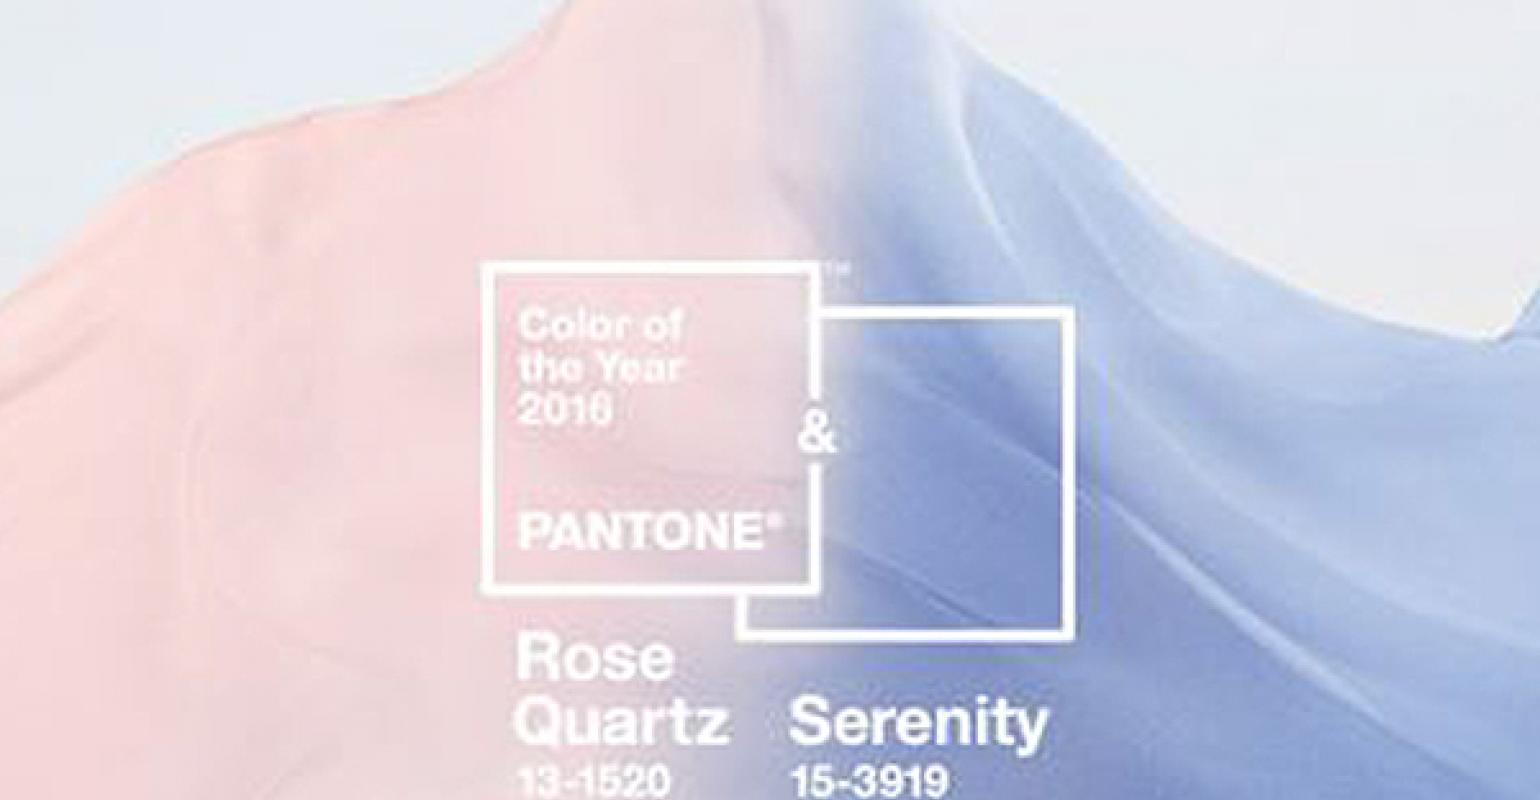 How Pantone Colors of the Year Rose Quartz and Serenity Join the